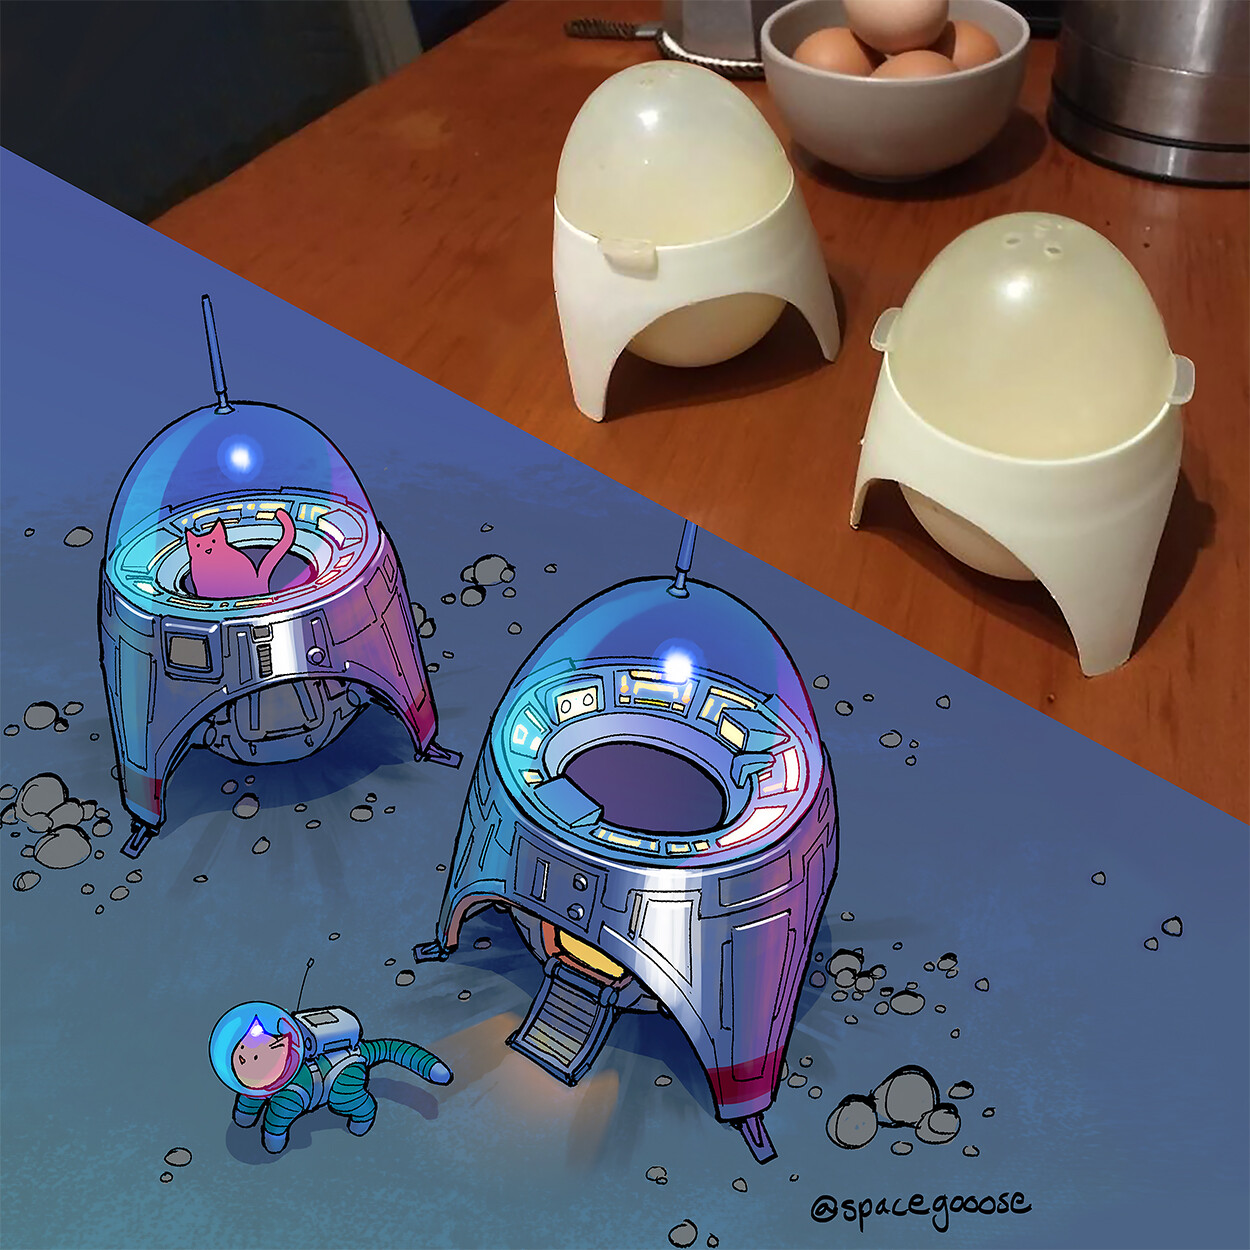 Space lander and egg cup comparison